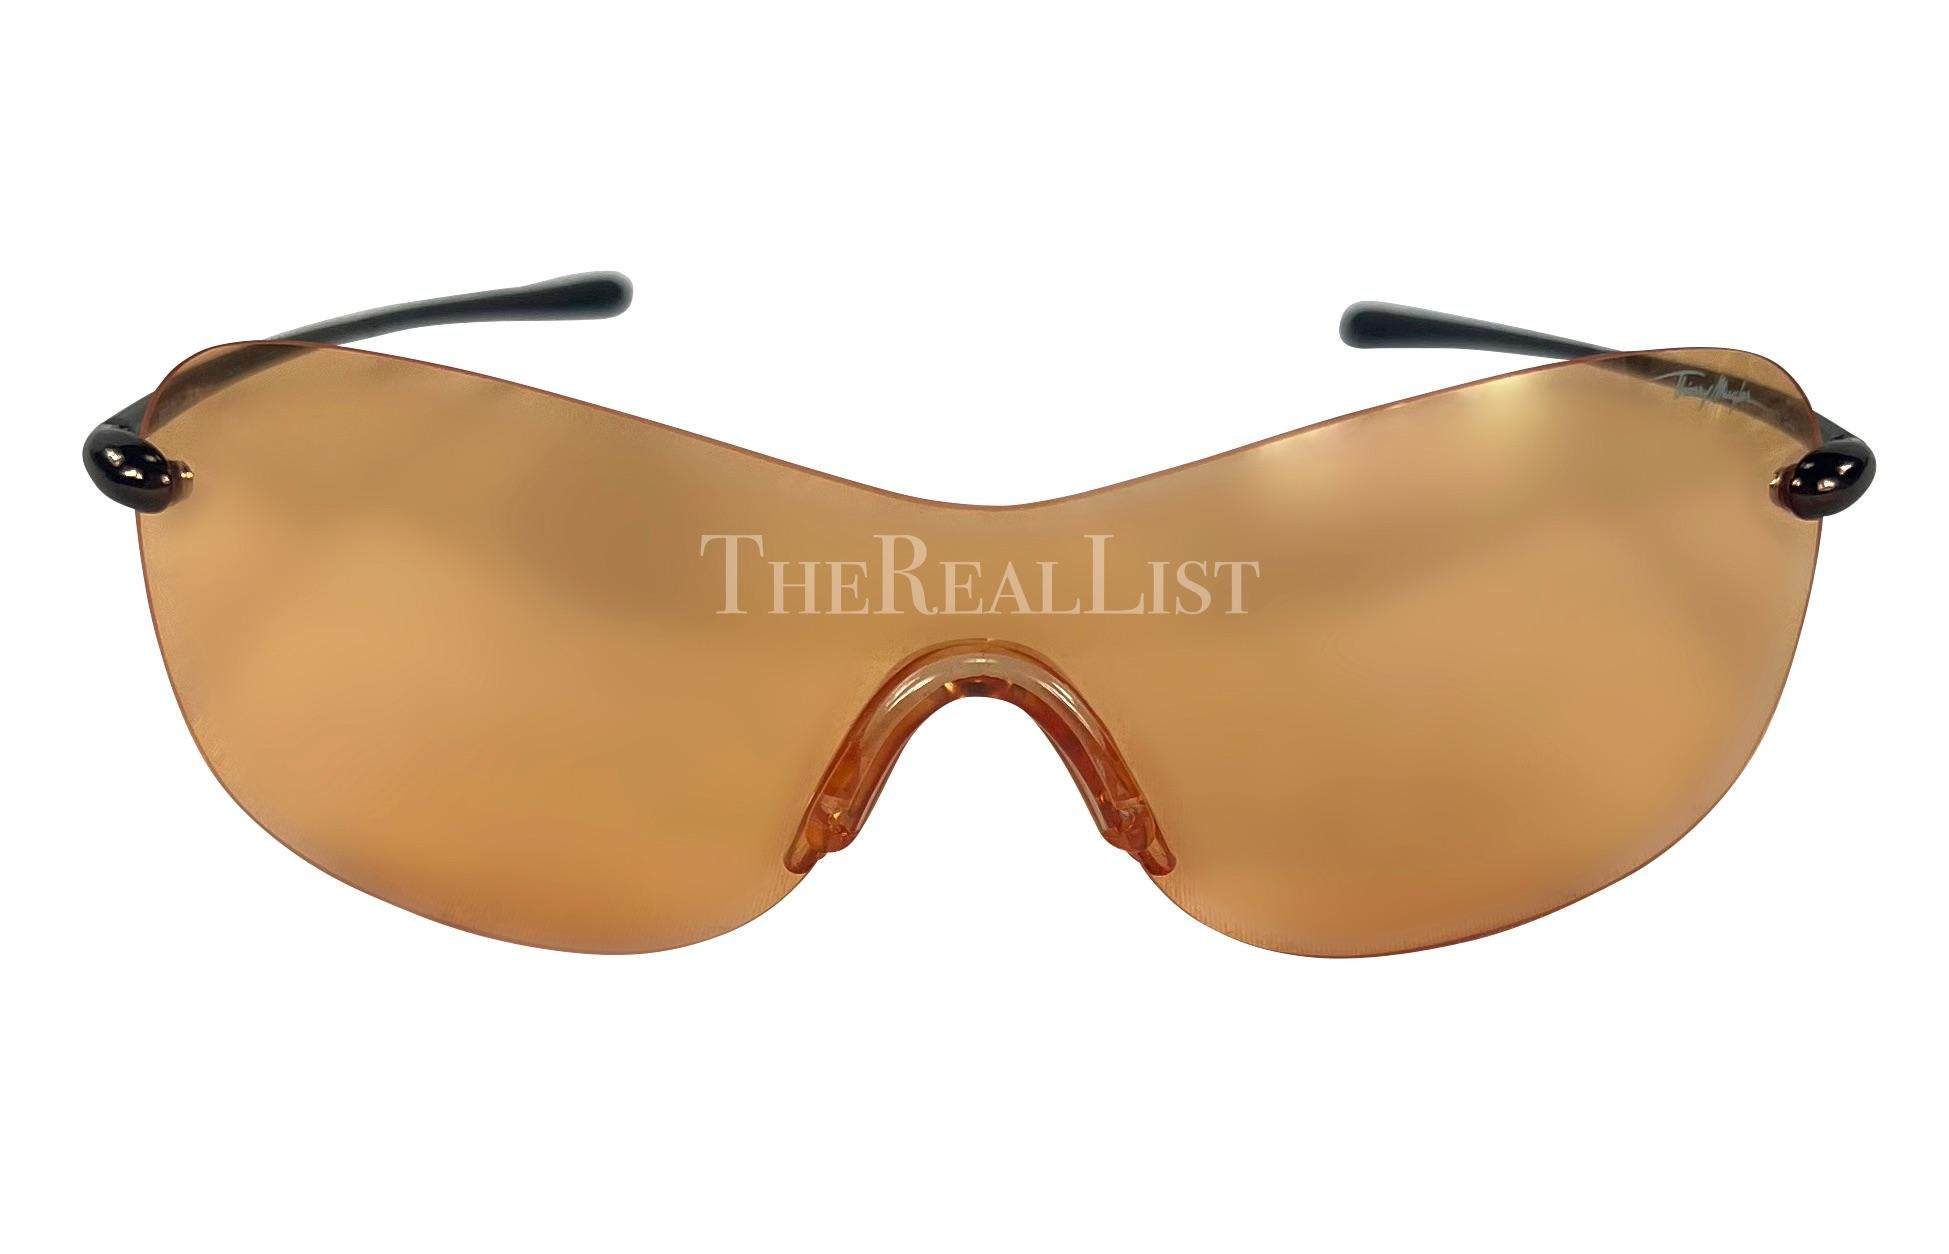 F/W 2001 Thierry Mugler Runway Orange Transparent Rimless Shield Sunglasses In Excellent Condition For Sale In West Hollywood, CA